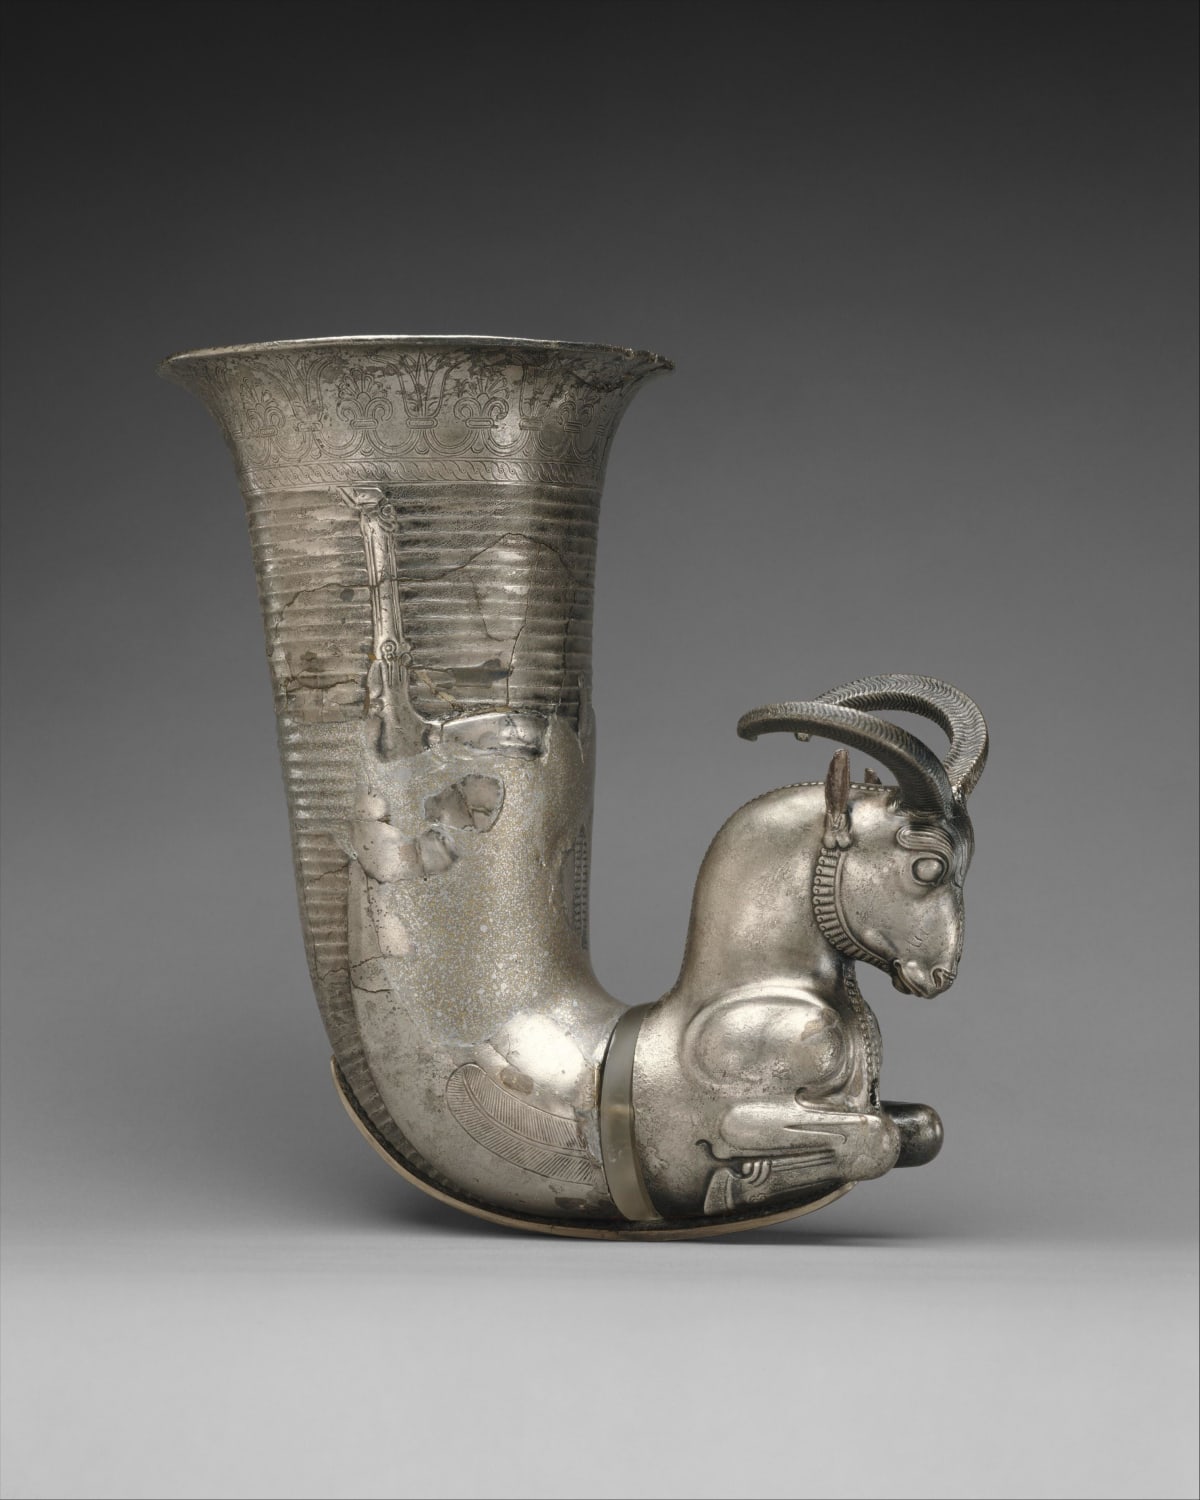 Silver Ram Rhyton from Iran, Achaemenid era, circa 5th century BCE. Usually used at royal banquets, the ability to drink skillfully from a rhyton marked one as a member of the elite. Rhyta were thus symbols of high status. Displayed at the Metropolitan Museum of Art